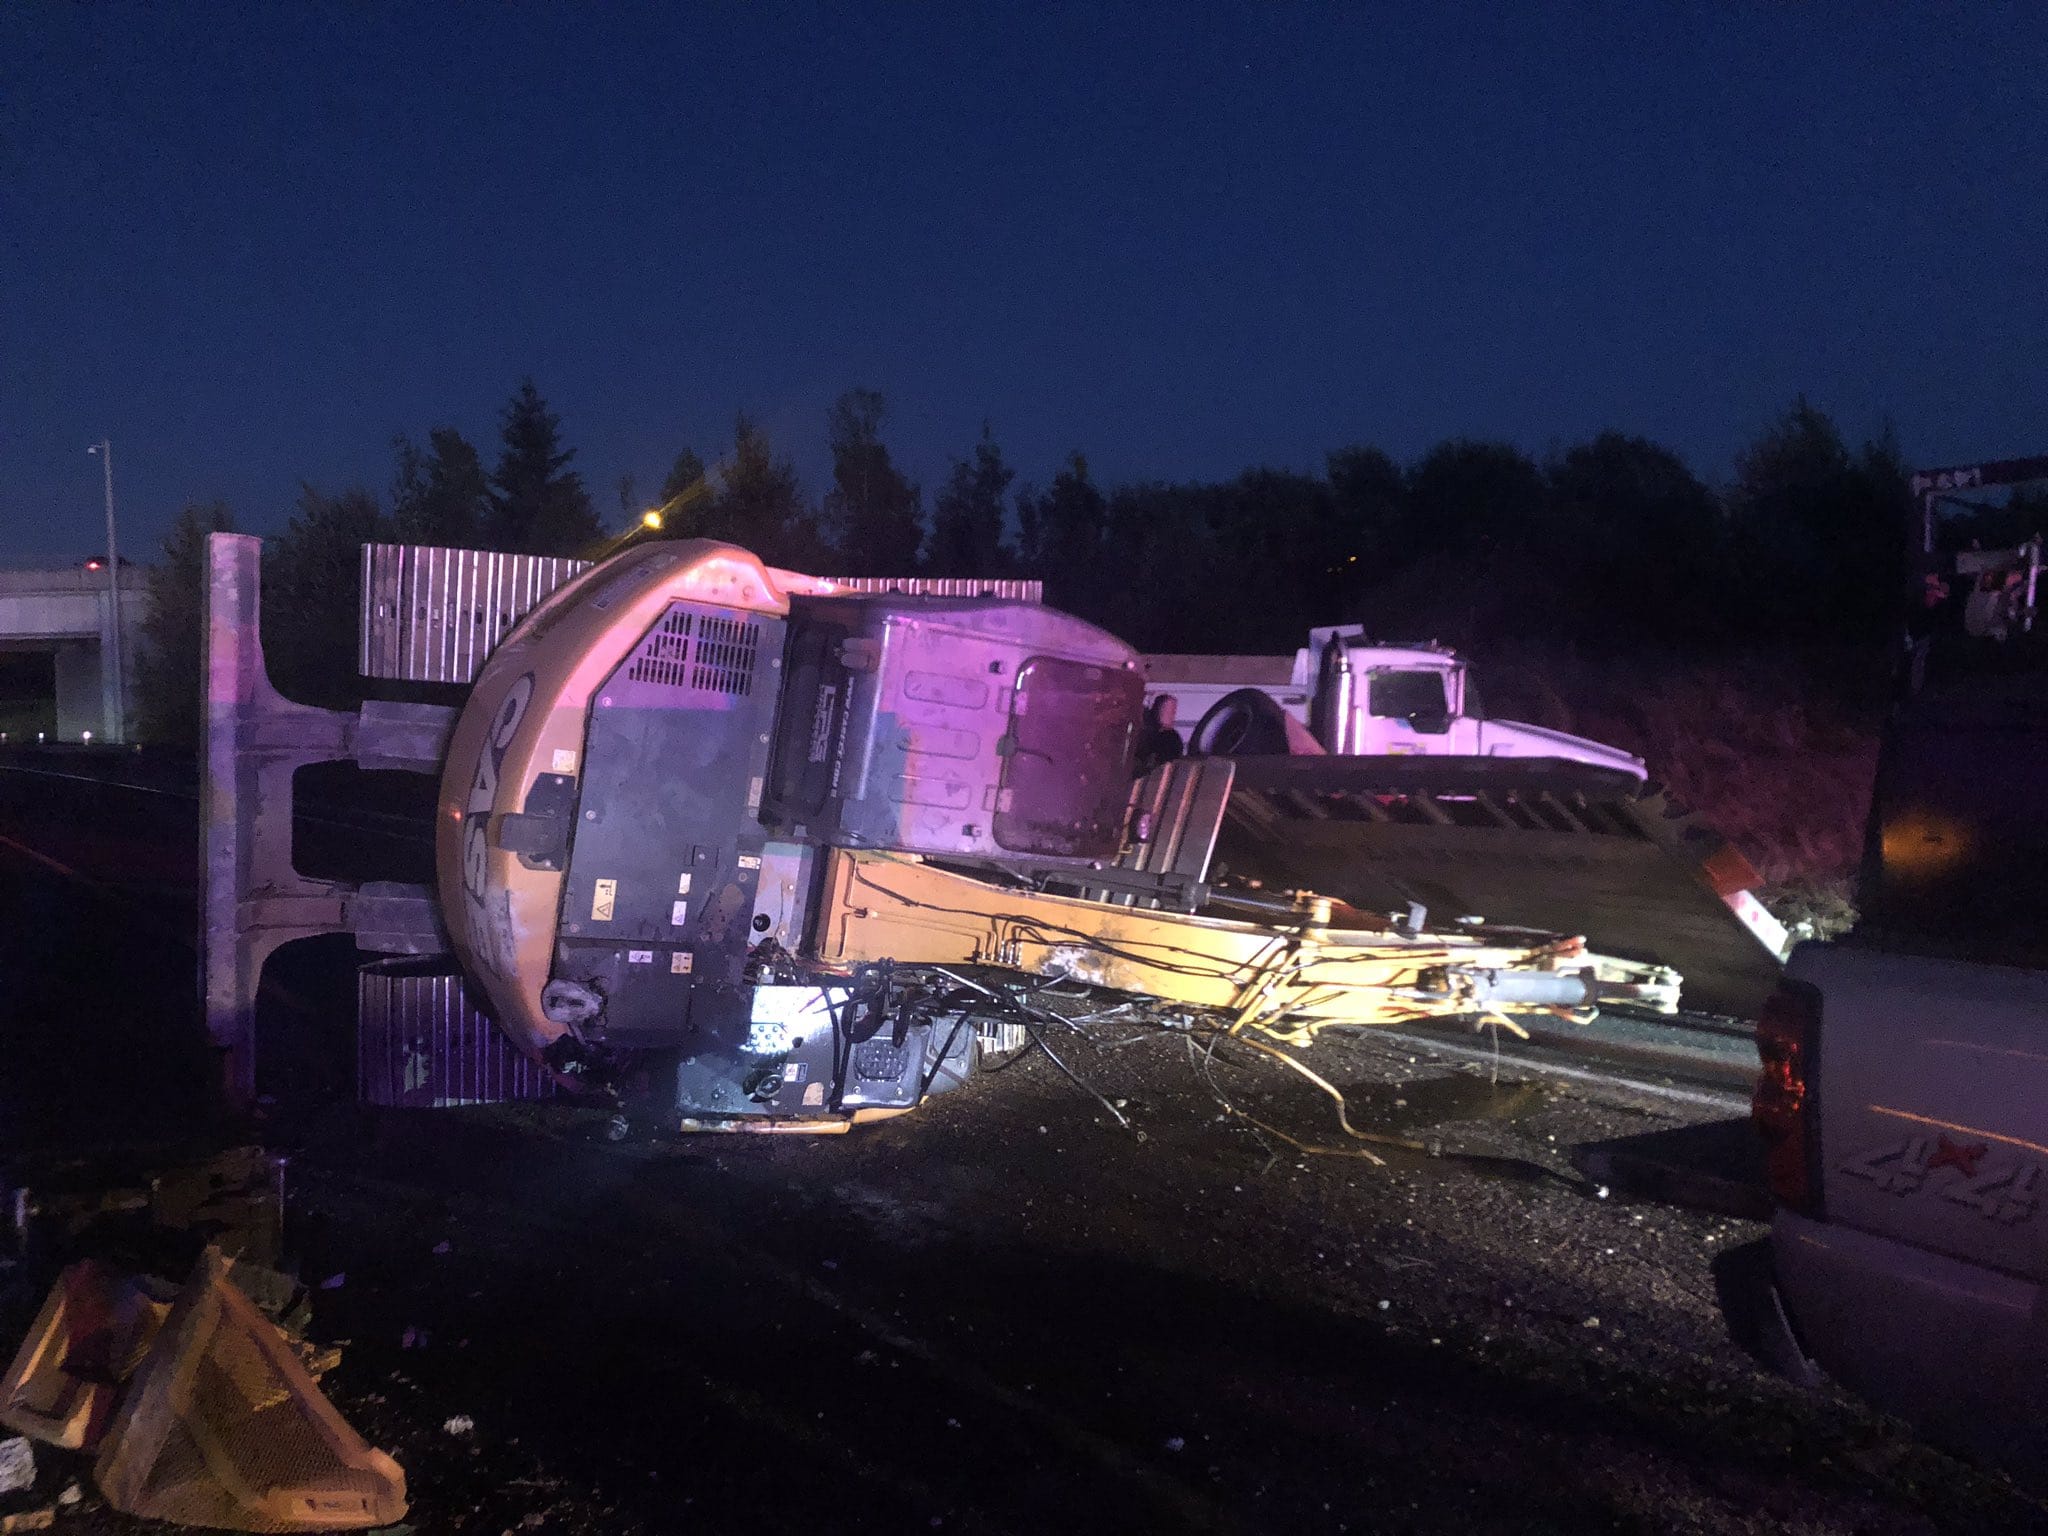 A tractor trailer hauling an excavator tipped over on the state Highway 502 onramp to southbound Interstate 5 in Ridgefield. The crash happened around 5:30 a.m., and the ramp remained blocked more than an hour later.